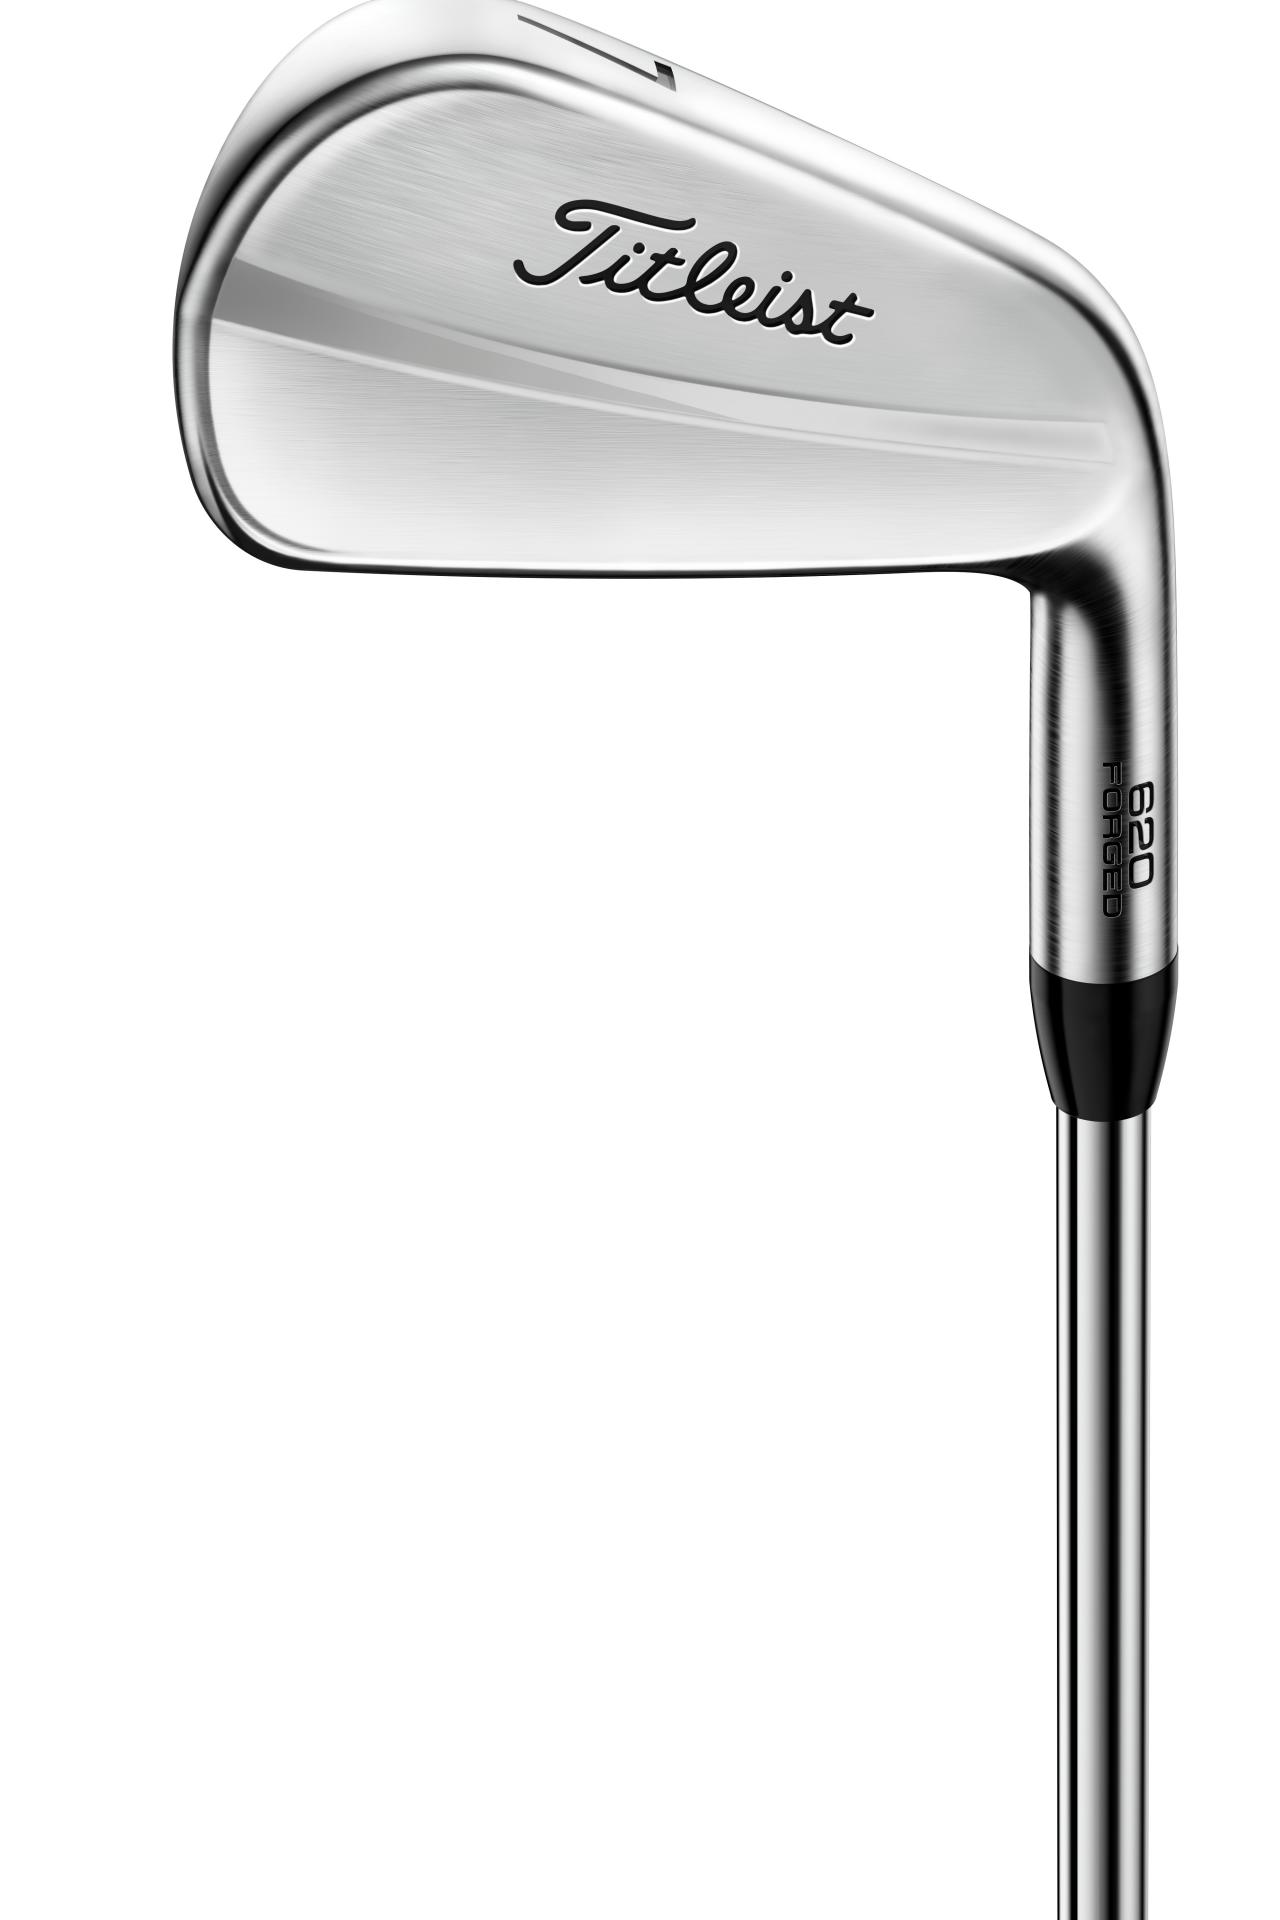 Titleist 620 irons add tweaks to throwback shape, construction to 